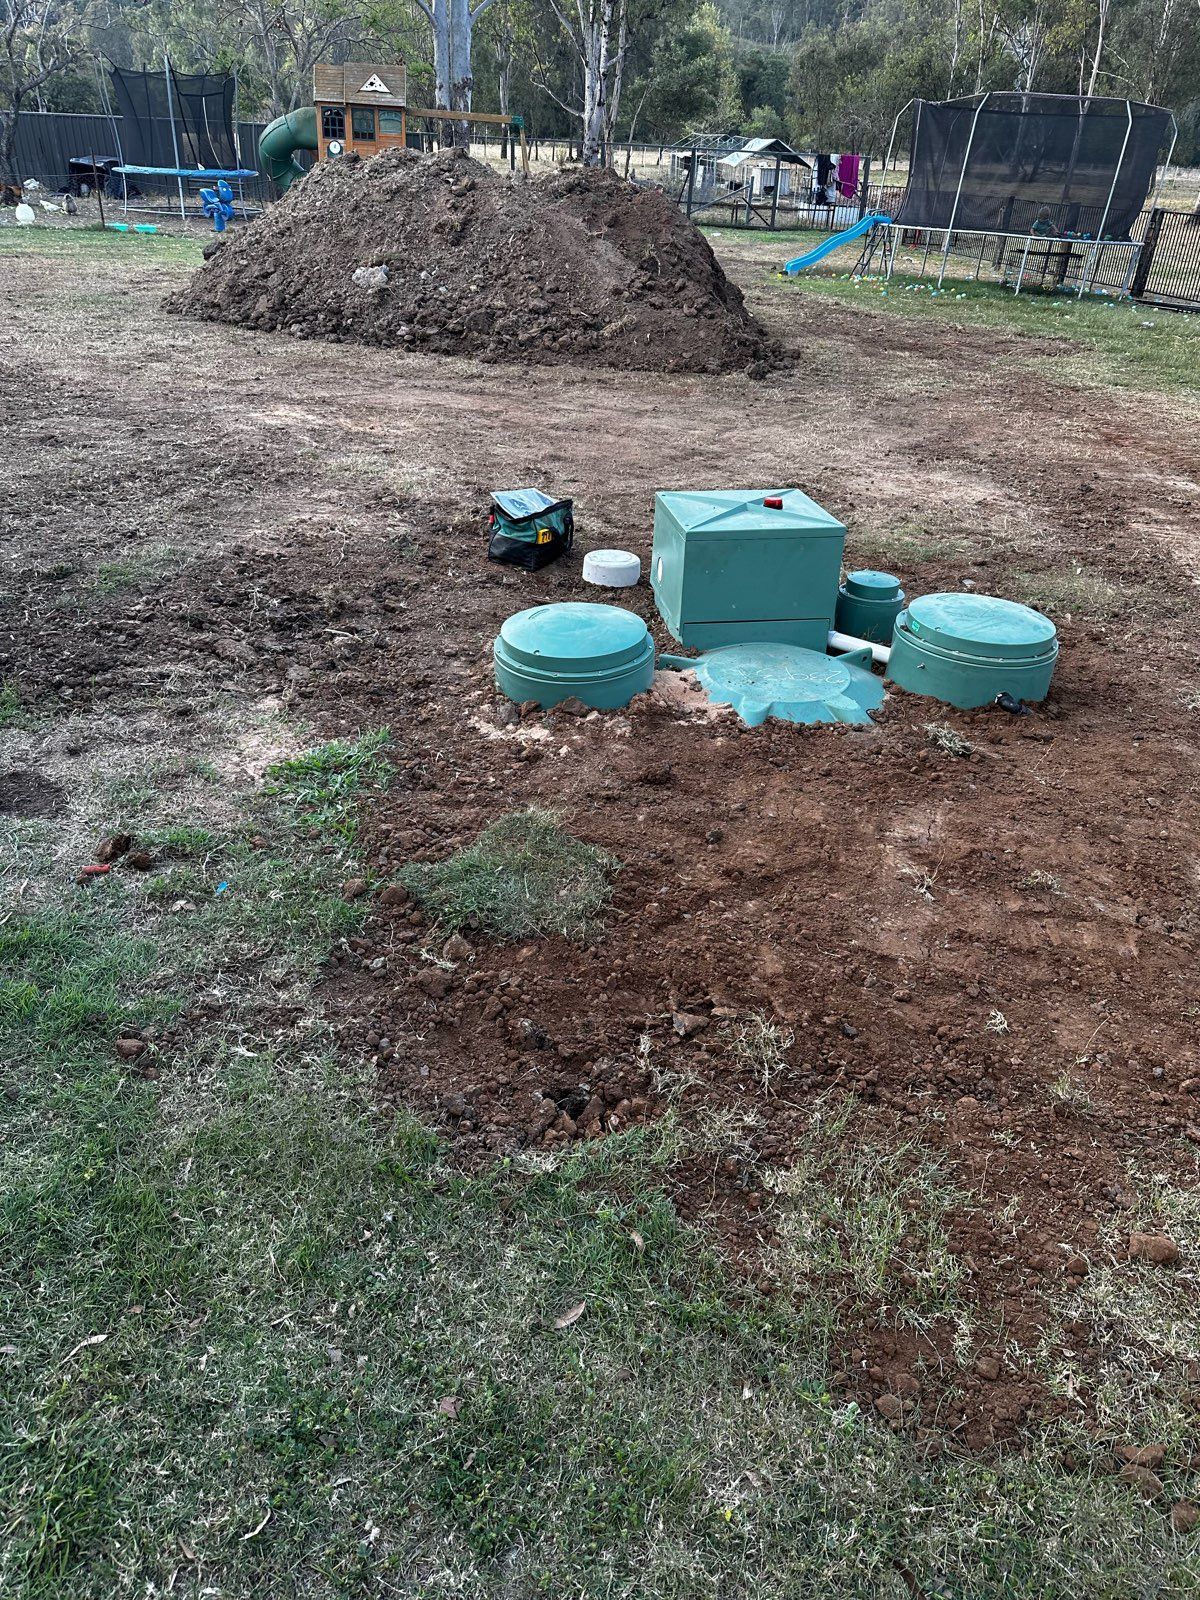 Picture of an Ozzi Kleen House Sewerage Treatment Plant recently installed by HC Plumbing.